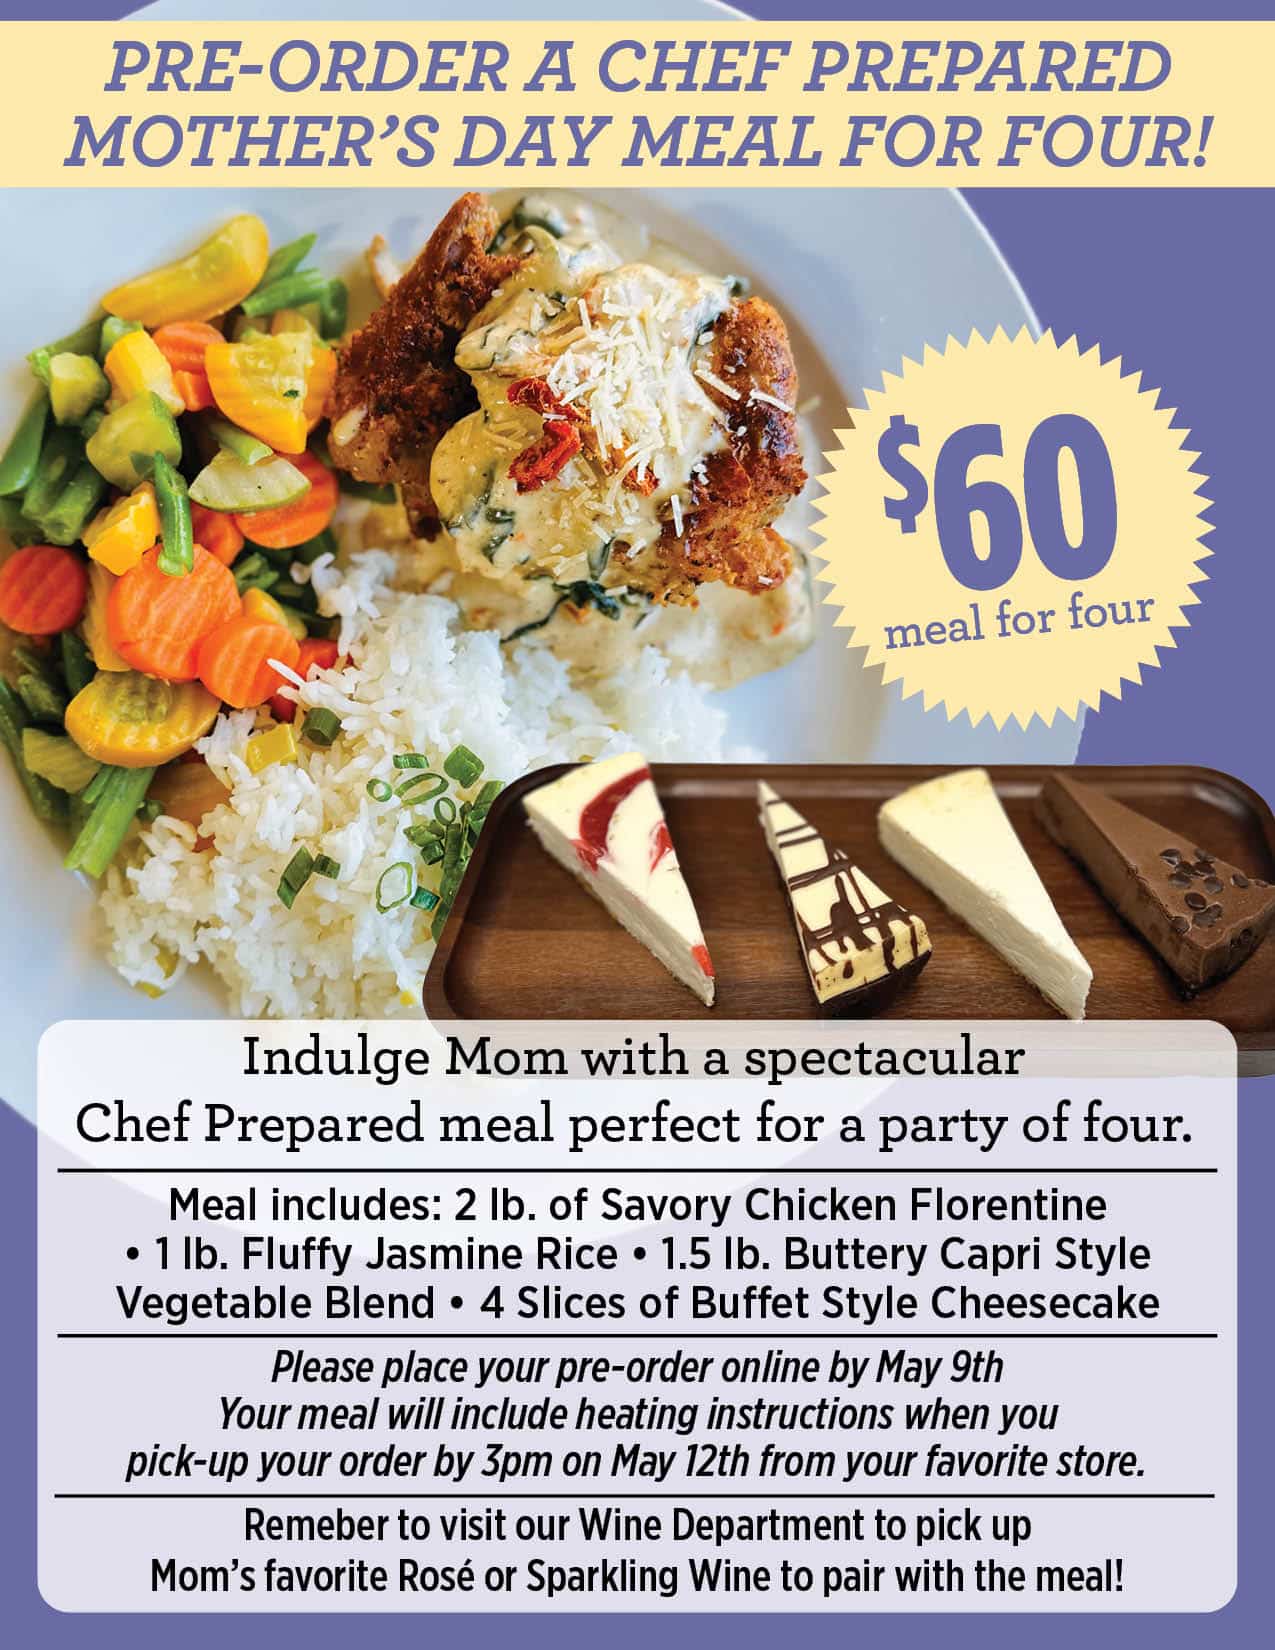 PRE-ORDER A CHEF PREPARED MOTHER’S DAY MEAL FOR FOUR! $60 Meal for four Indulge Mom with a spectacular Chef Prepared meal perfect for a party of four. Meal includes: 2 lb. of Savory Chicken Florentine • 1 lb. Fluffy Jasmine Rice • 1.5 lb. Buttery Capri Style Vegetable Blend • 4 Slices of Buffet Style Cheesecake Please place your pre-order online by May 9th Your meal will include heating instructions when you pick-up your order by 3pm on May 12th from your favorite store. Remeber to visit our Wine Department to pick up Mom’s favorite Rosé or Sparkling Wine to pair with the meal!